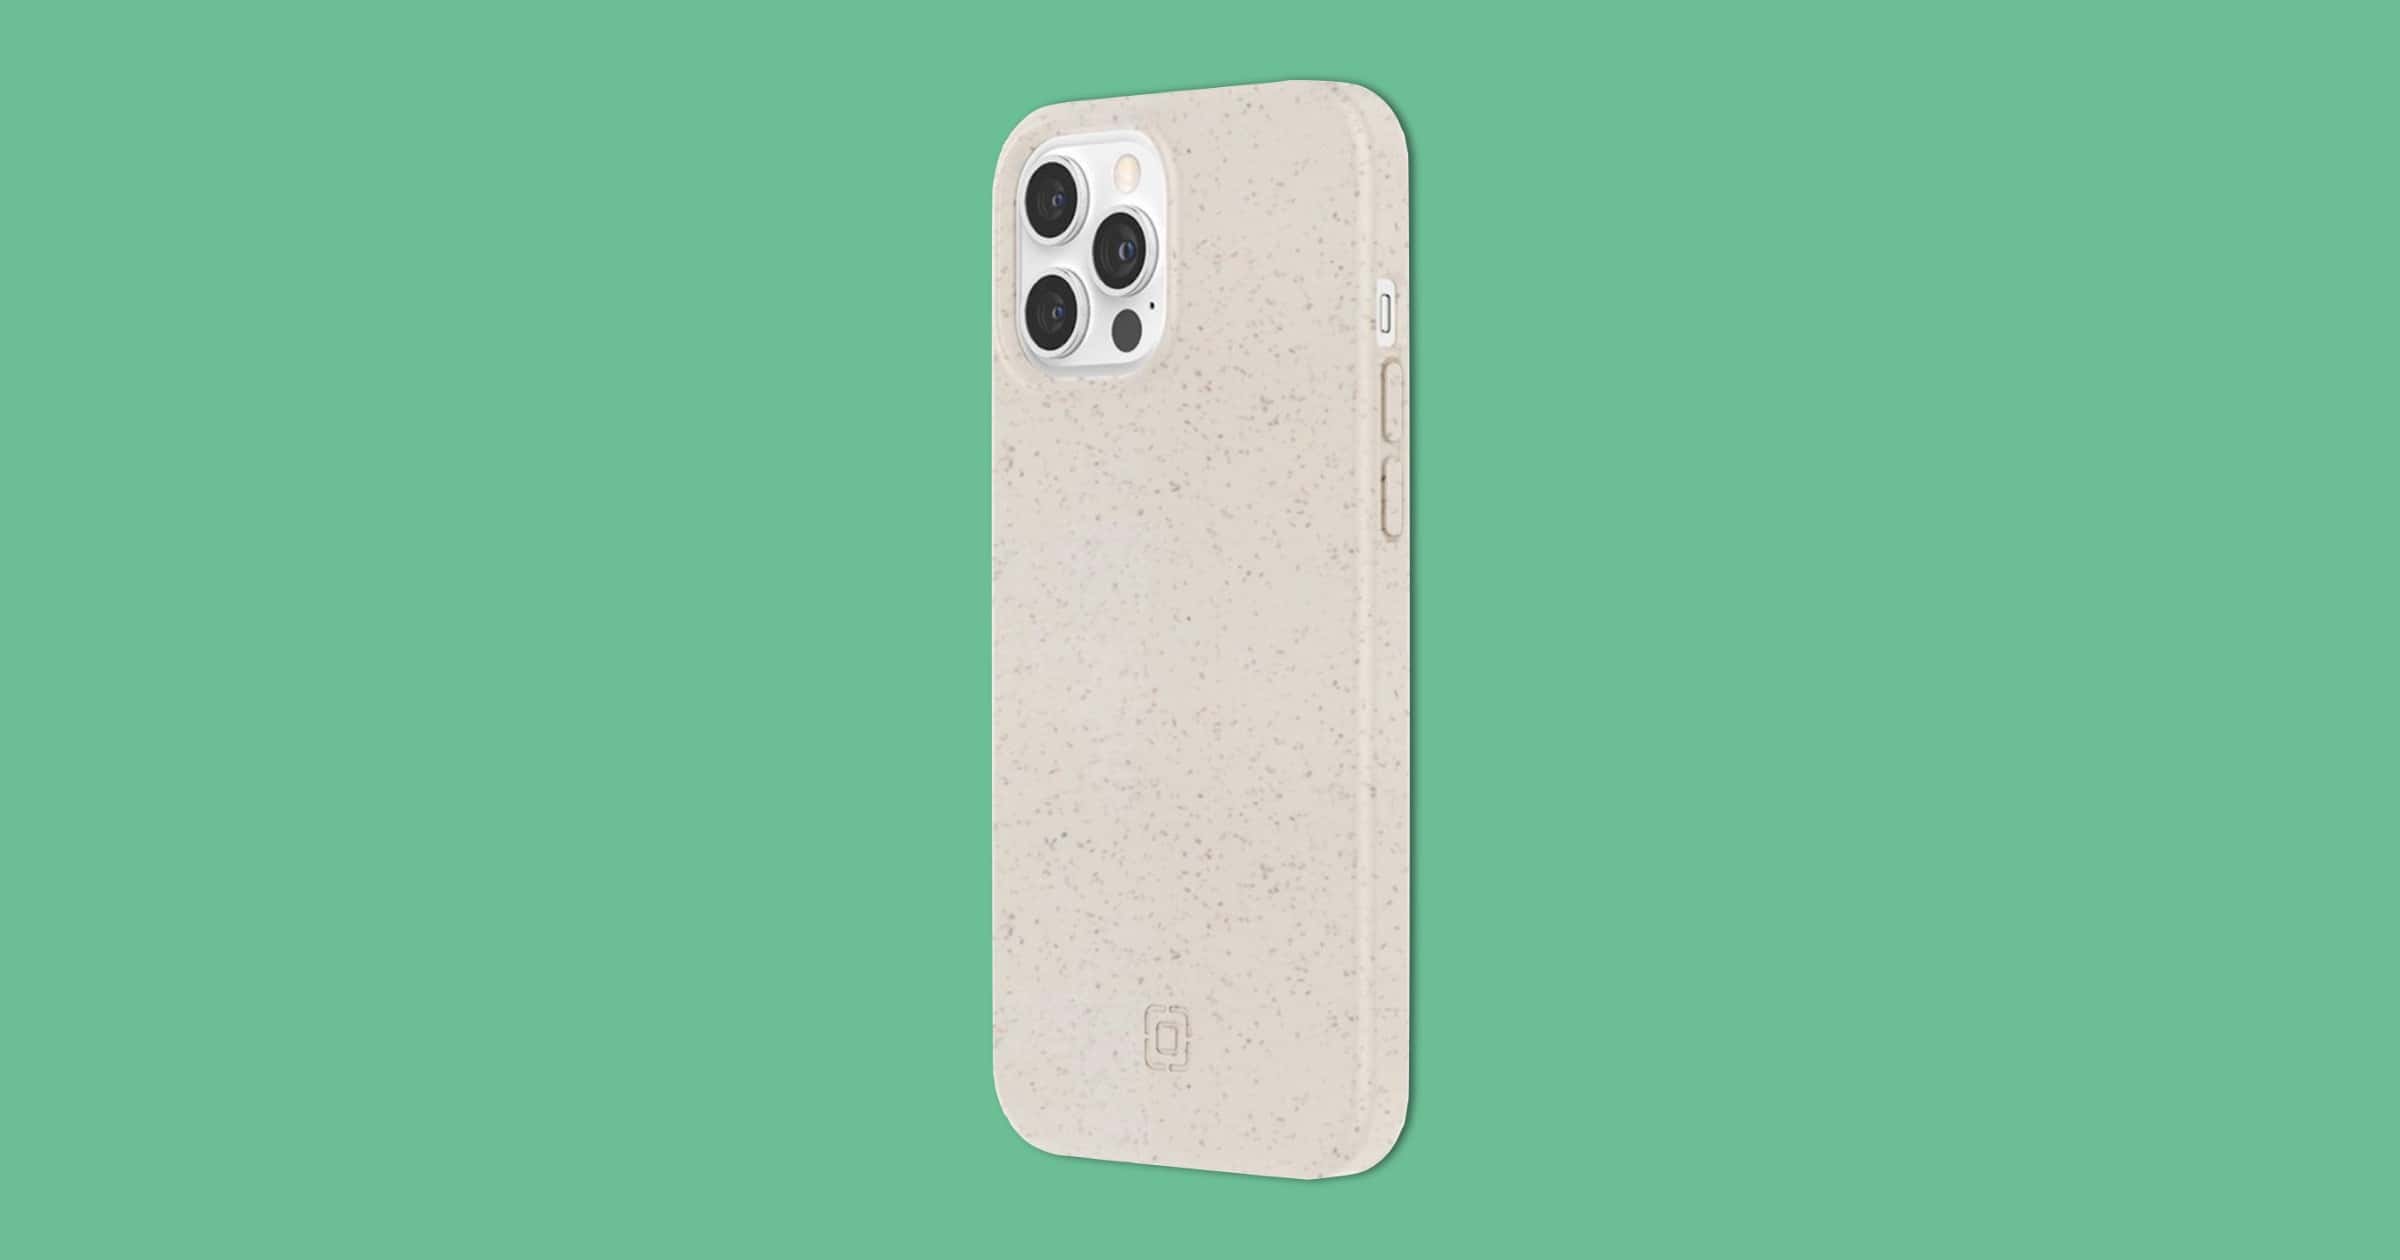 Smartphone Case Maker ‘Incipio’ Partners With Eden Reforestation Projects